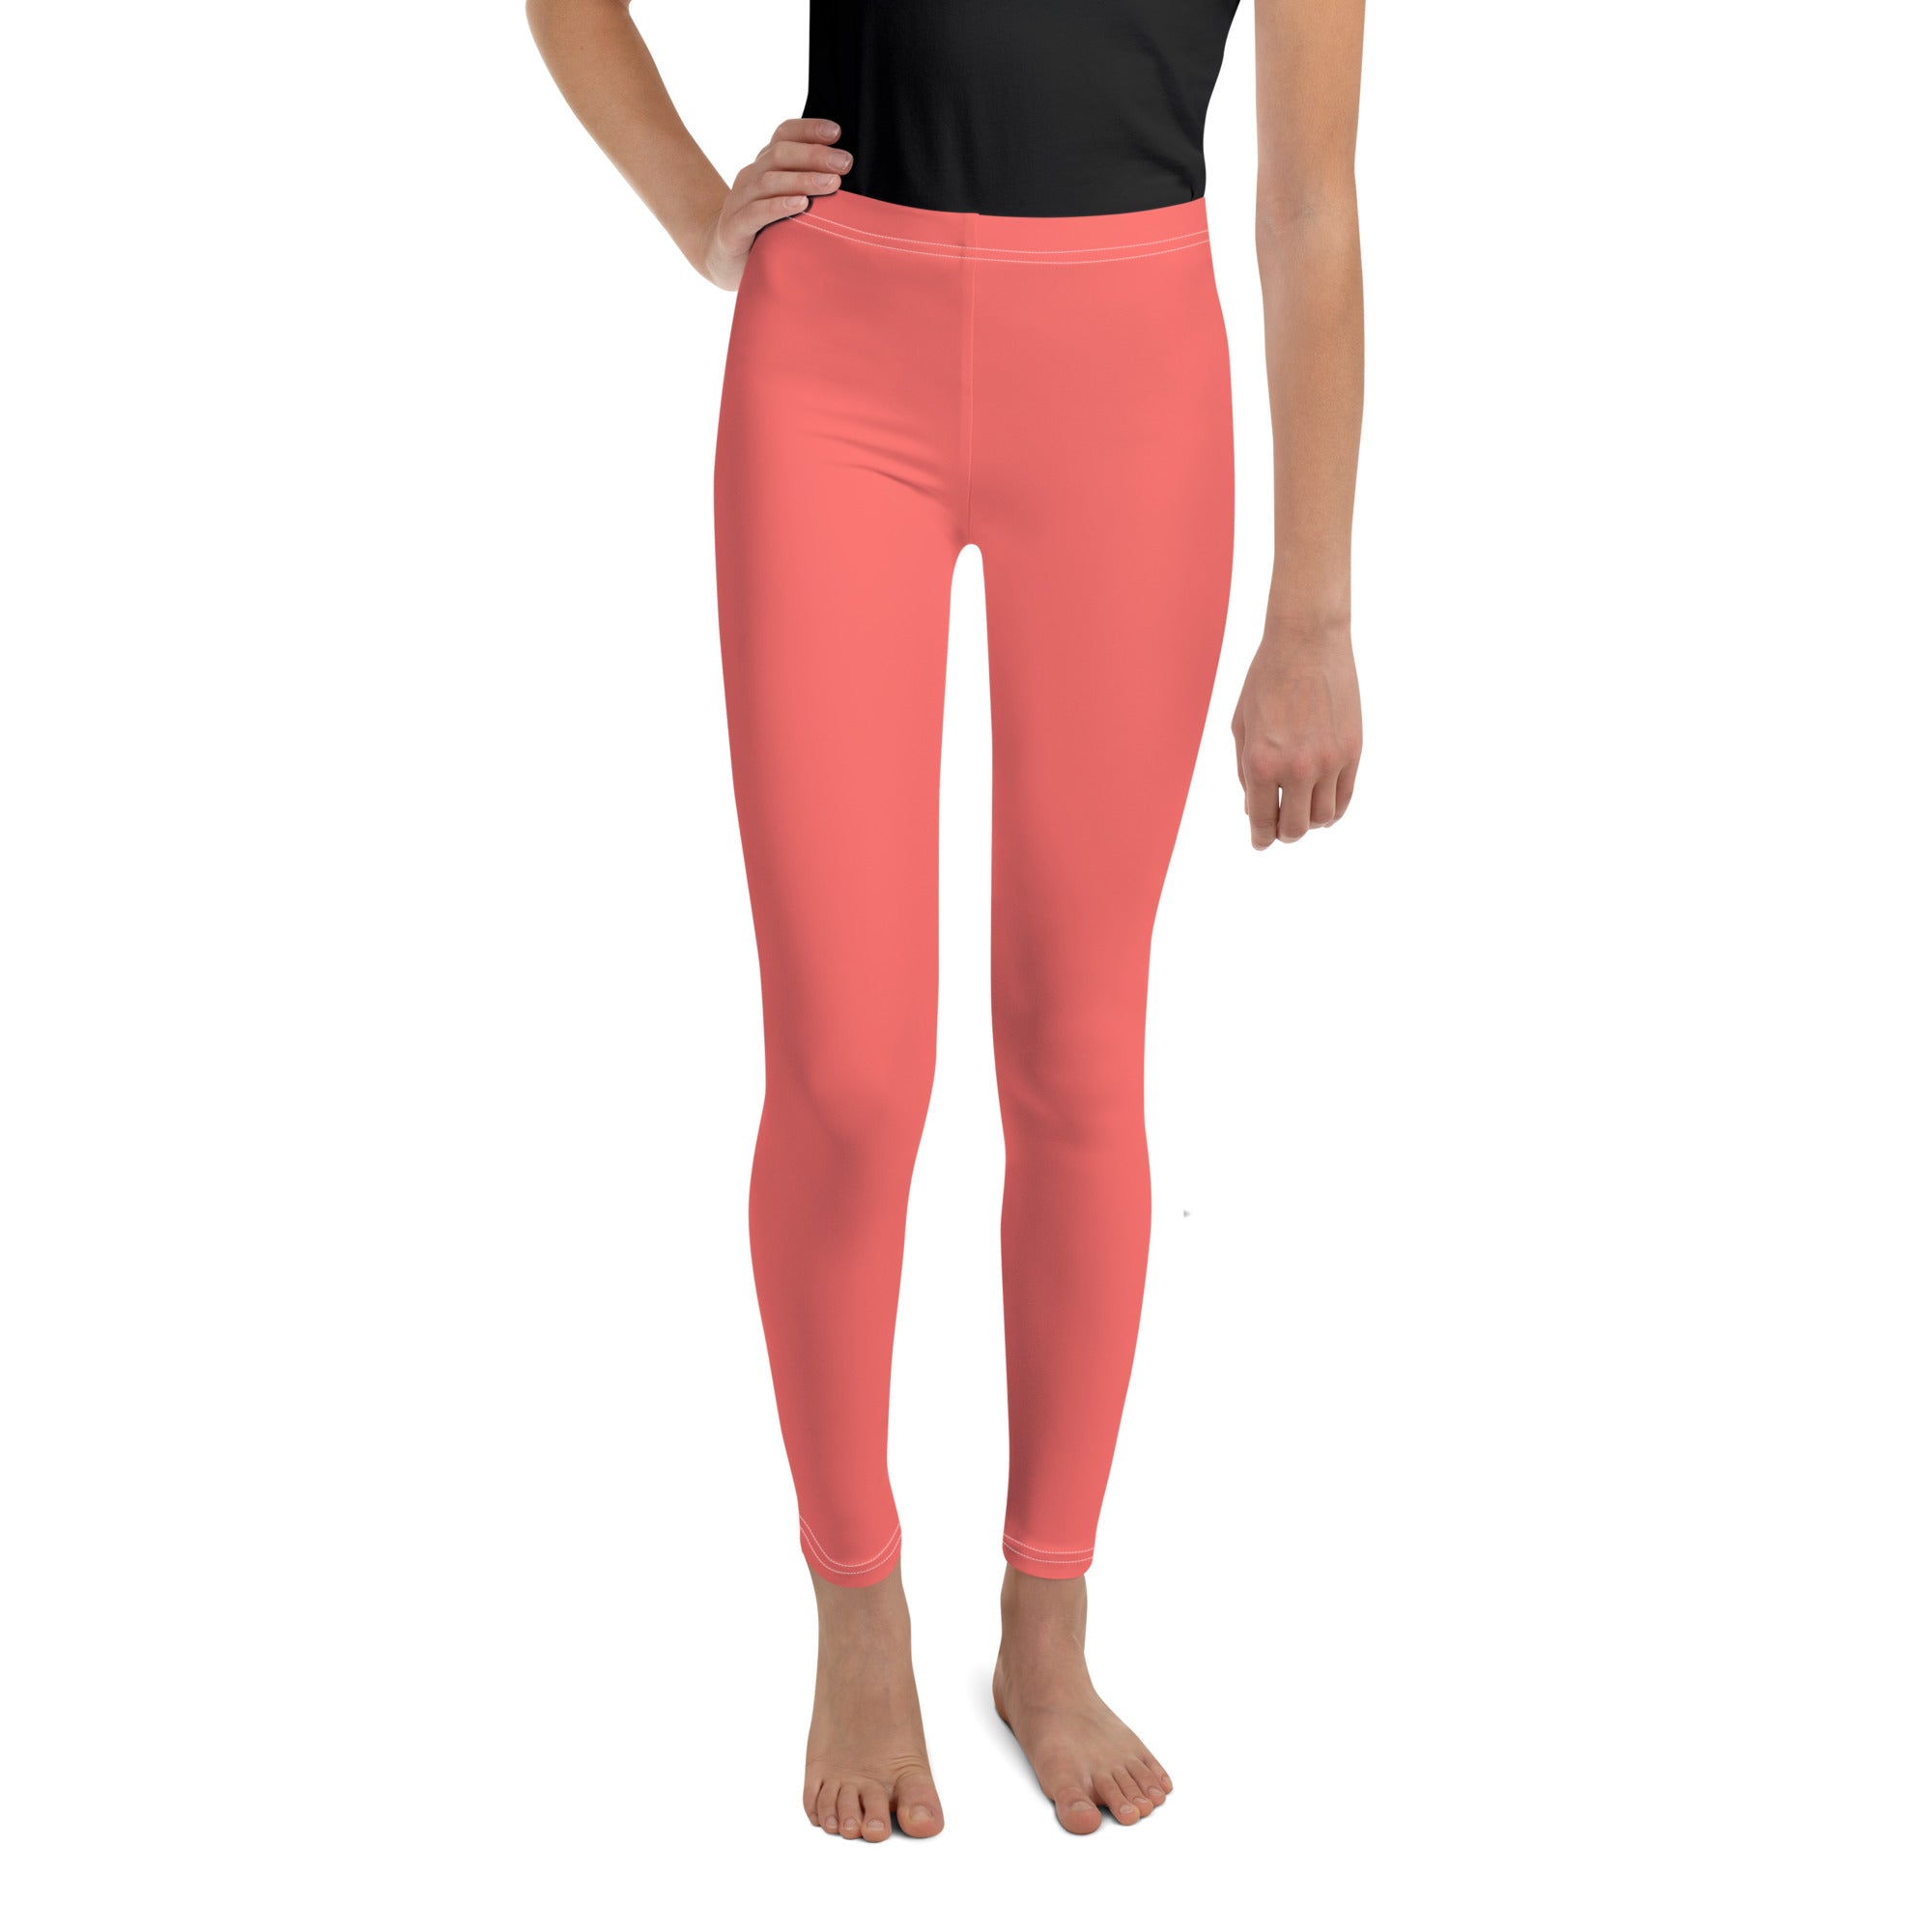 Youth Leggings- Coral